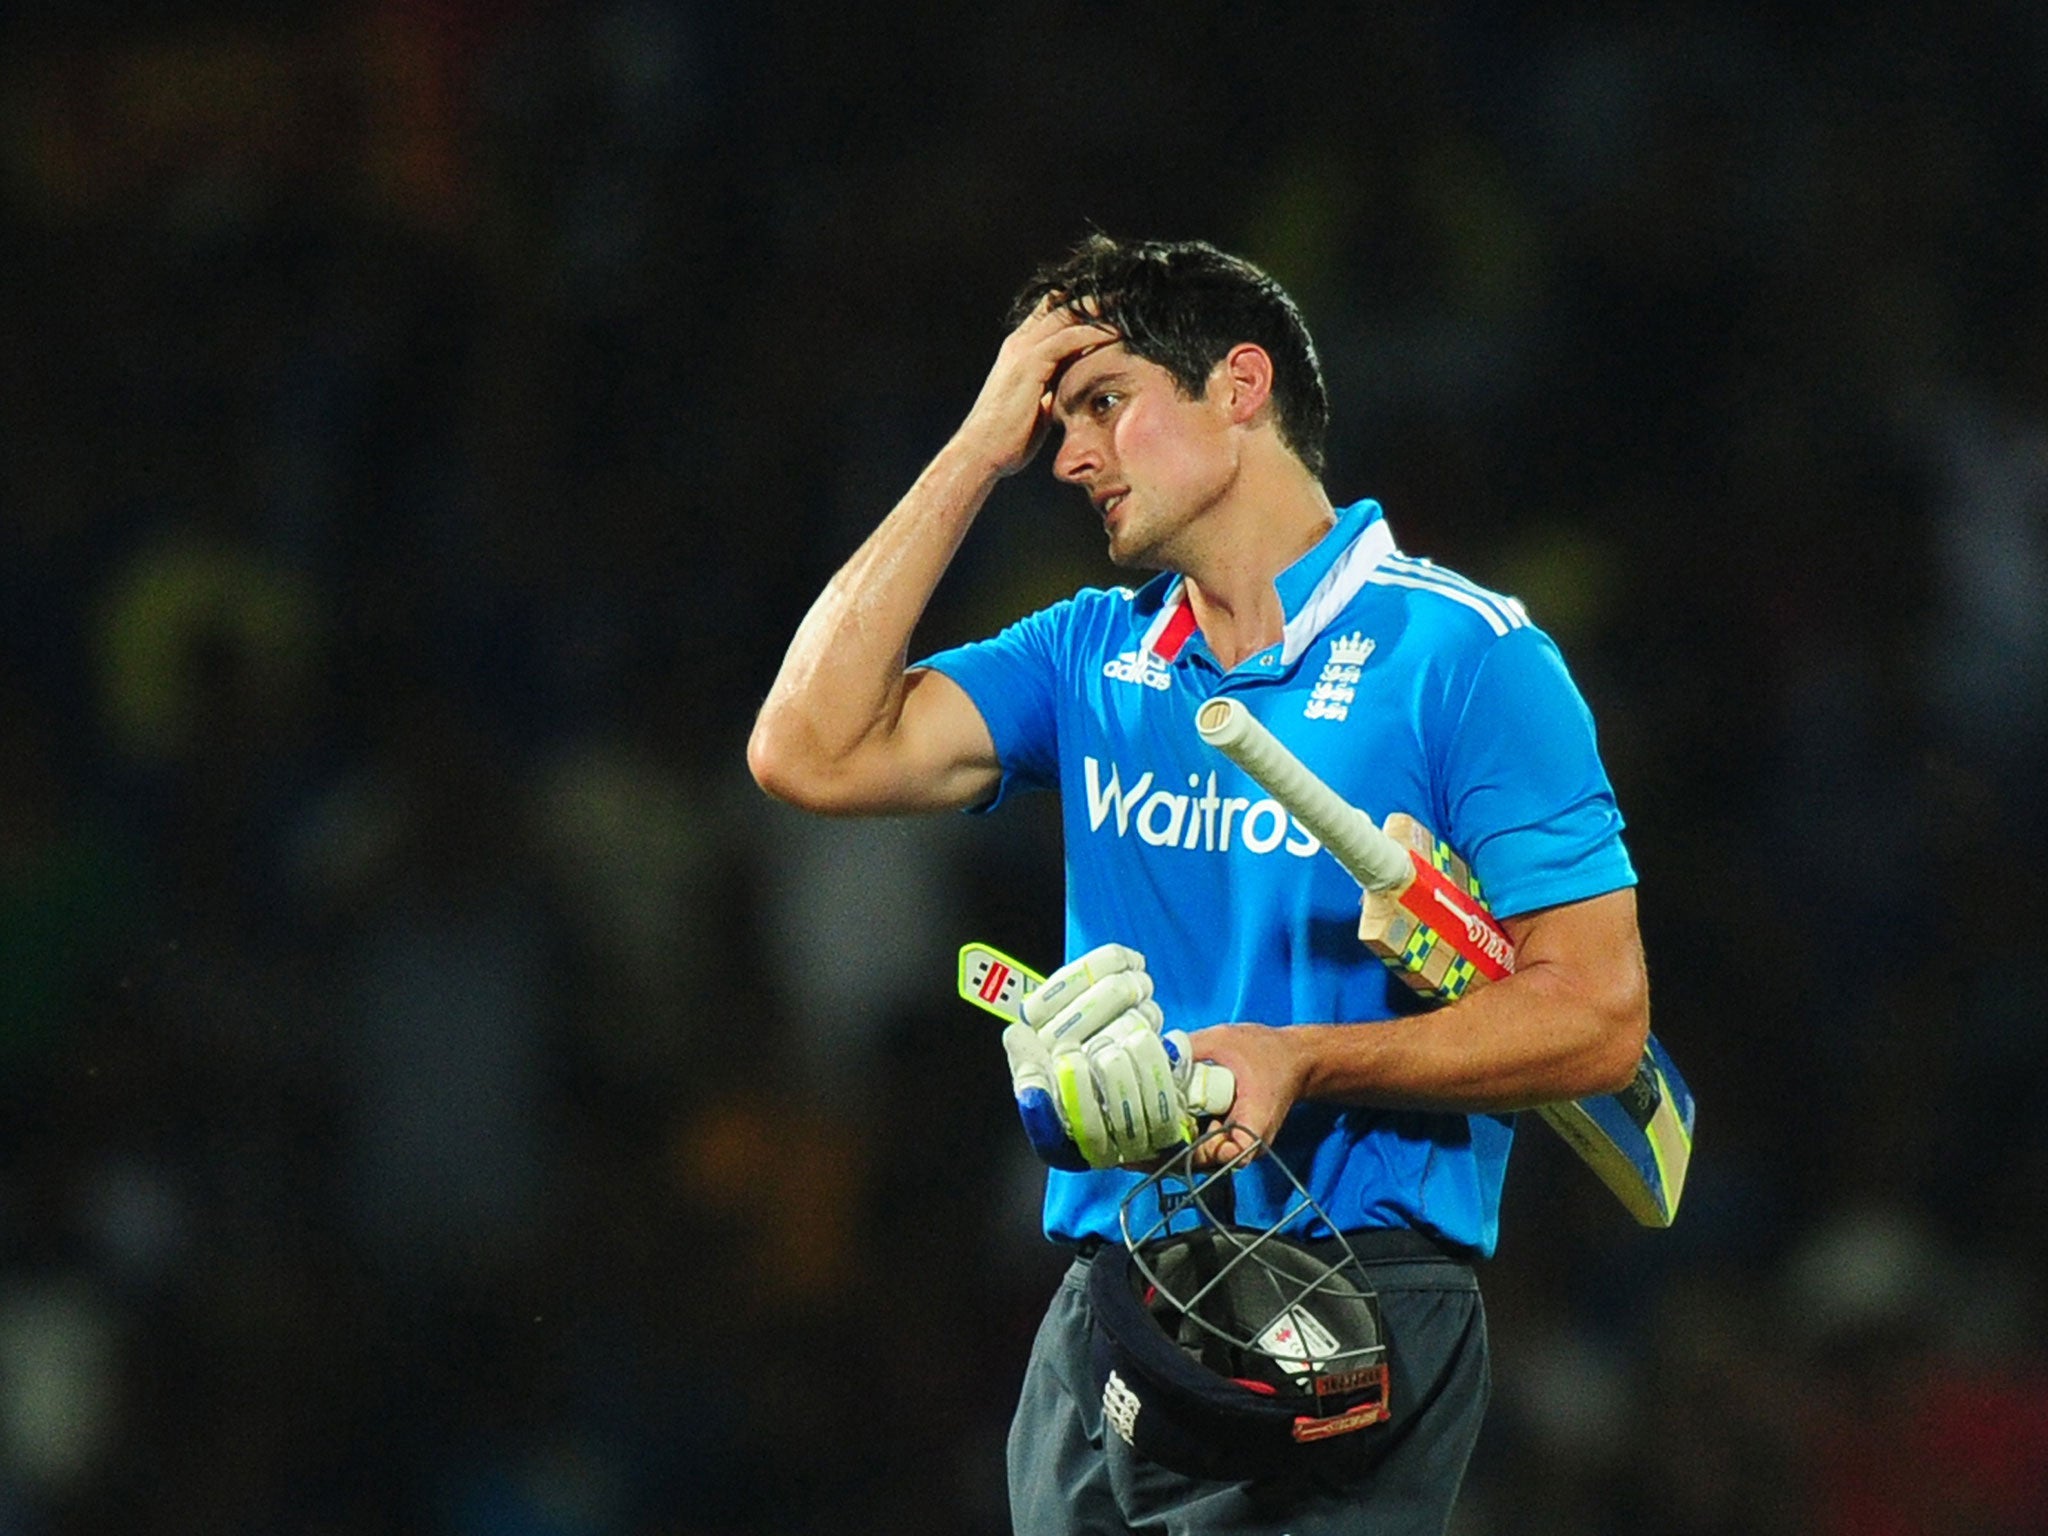 Alastair Cook criticised his sacking as England ODI captain